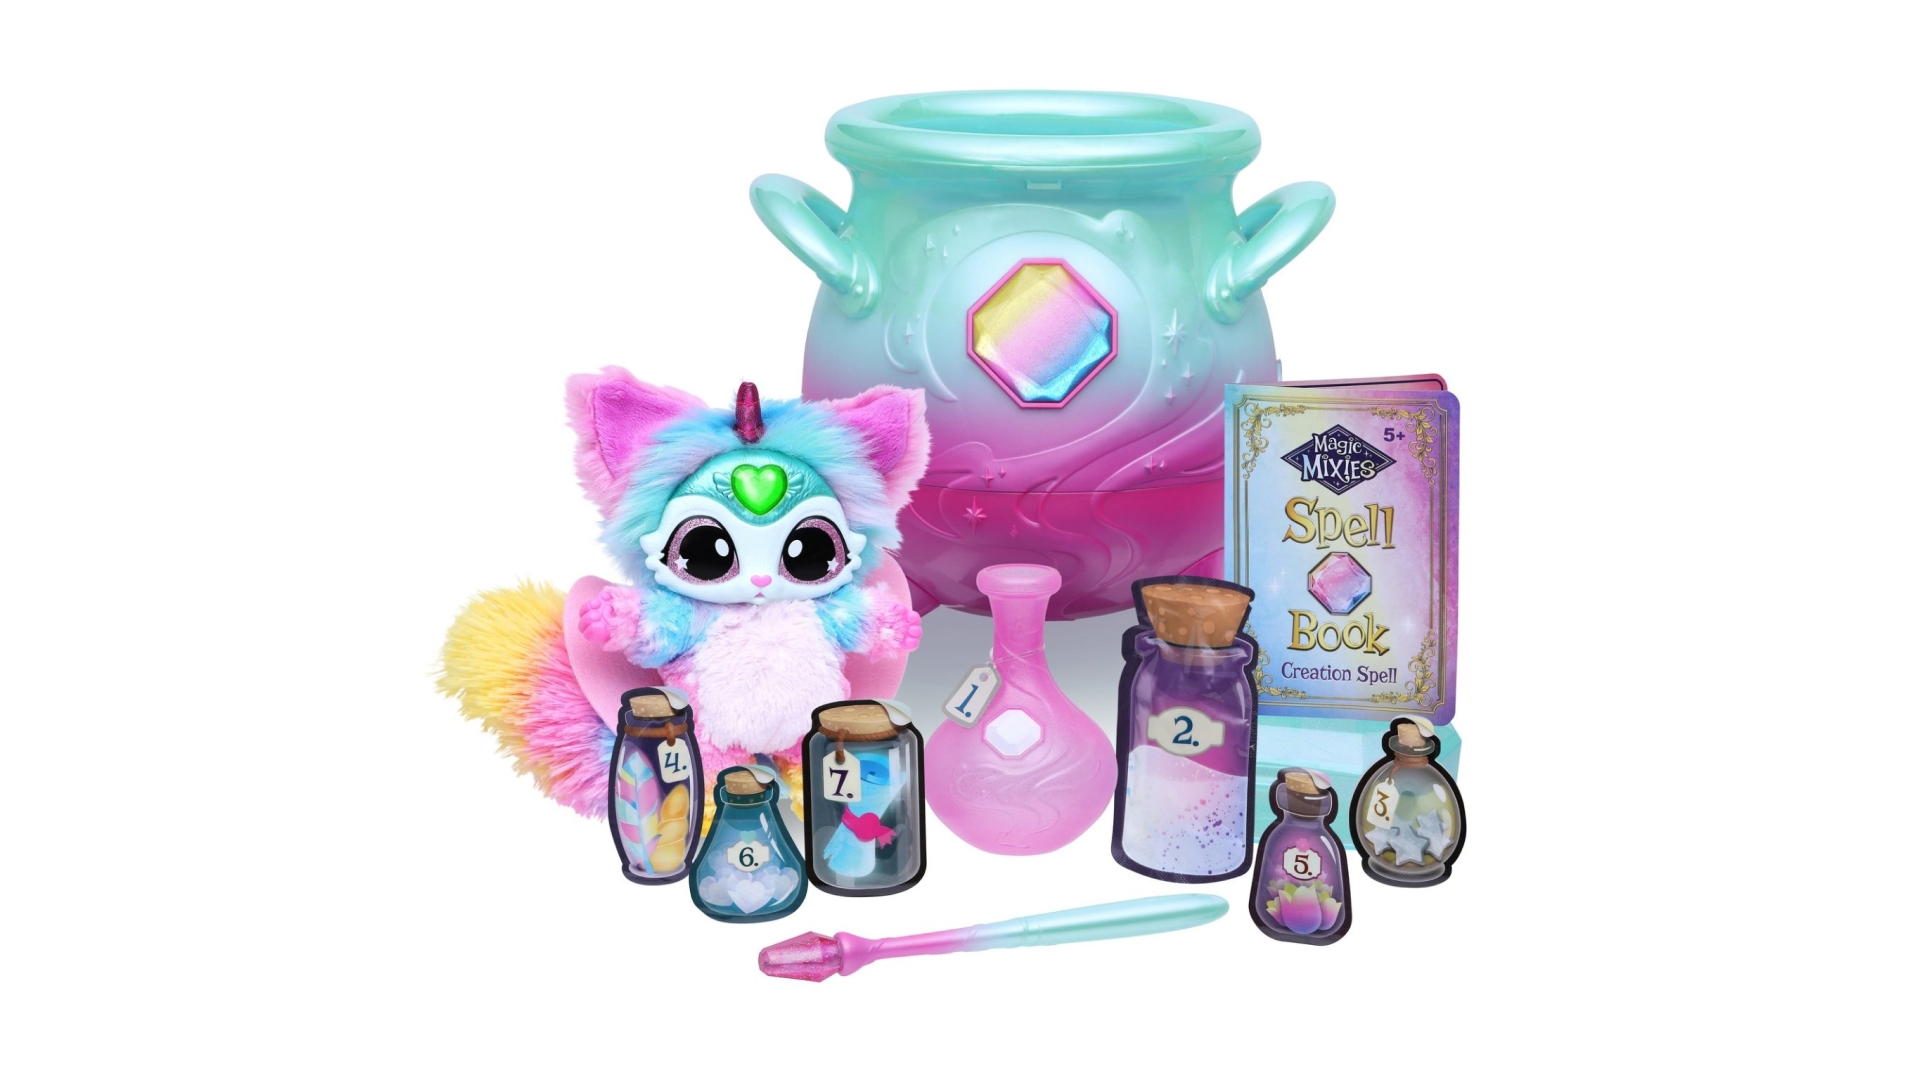 Magic Mixies Magical Misting Cauldron, a cauldron-shaped toy for mixing potions and revealing a furry friend.